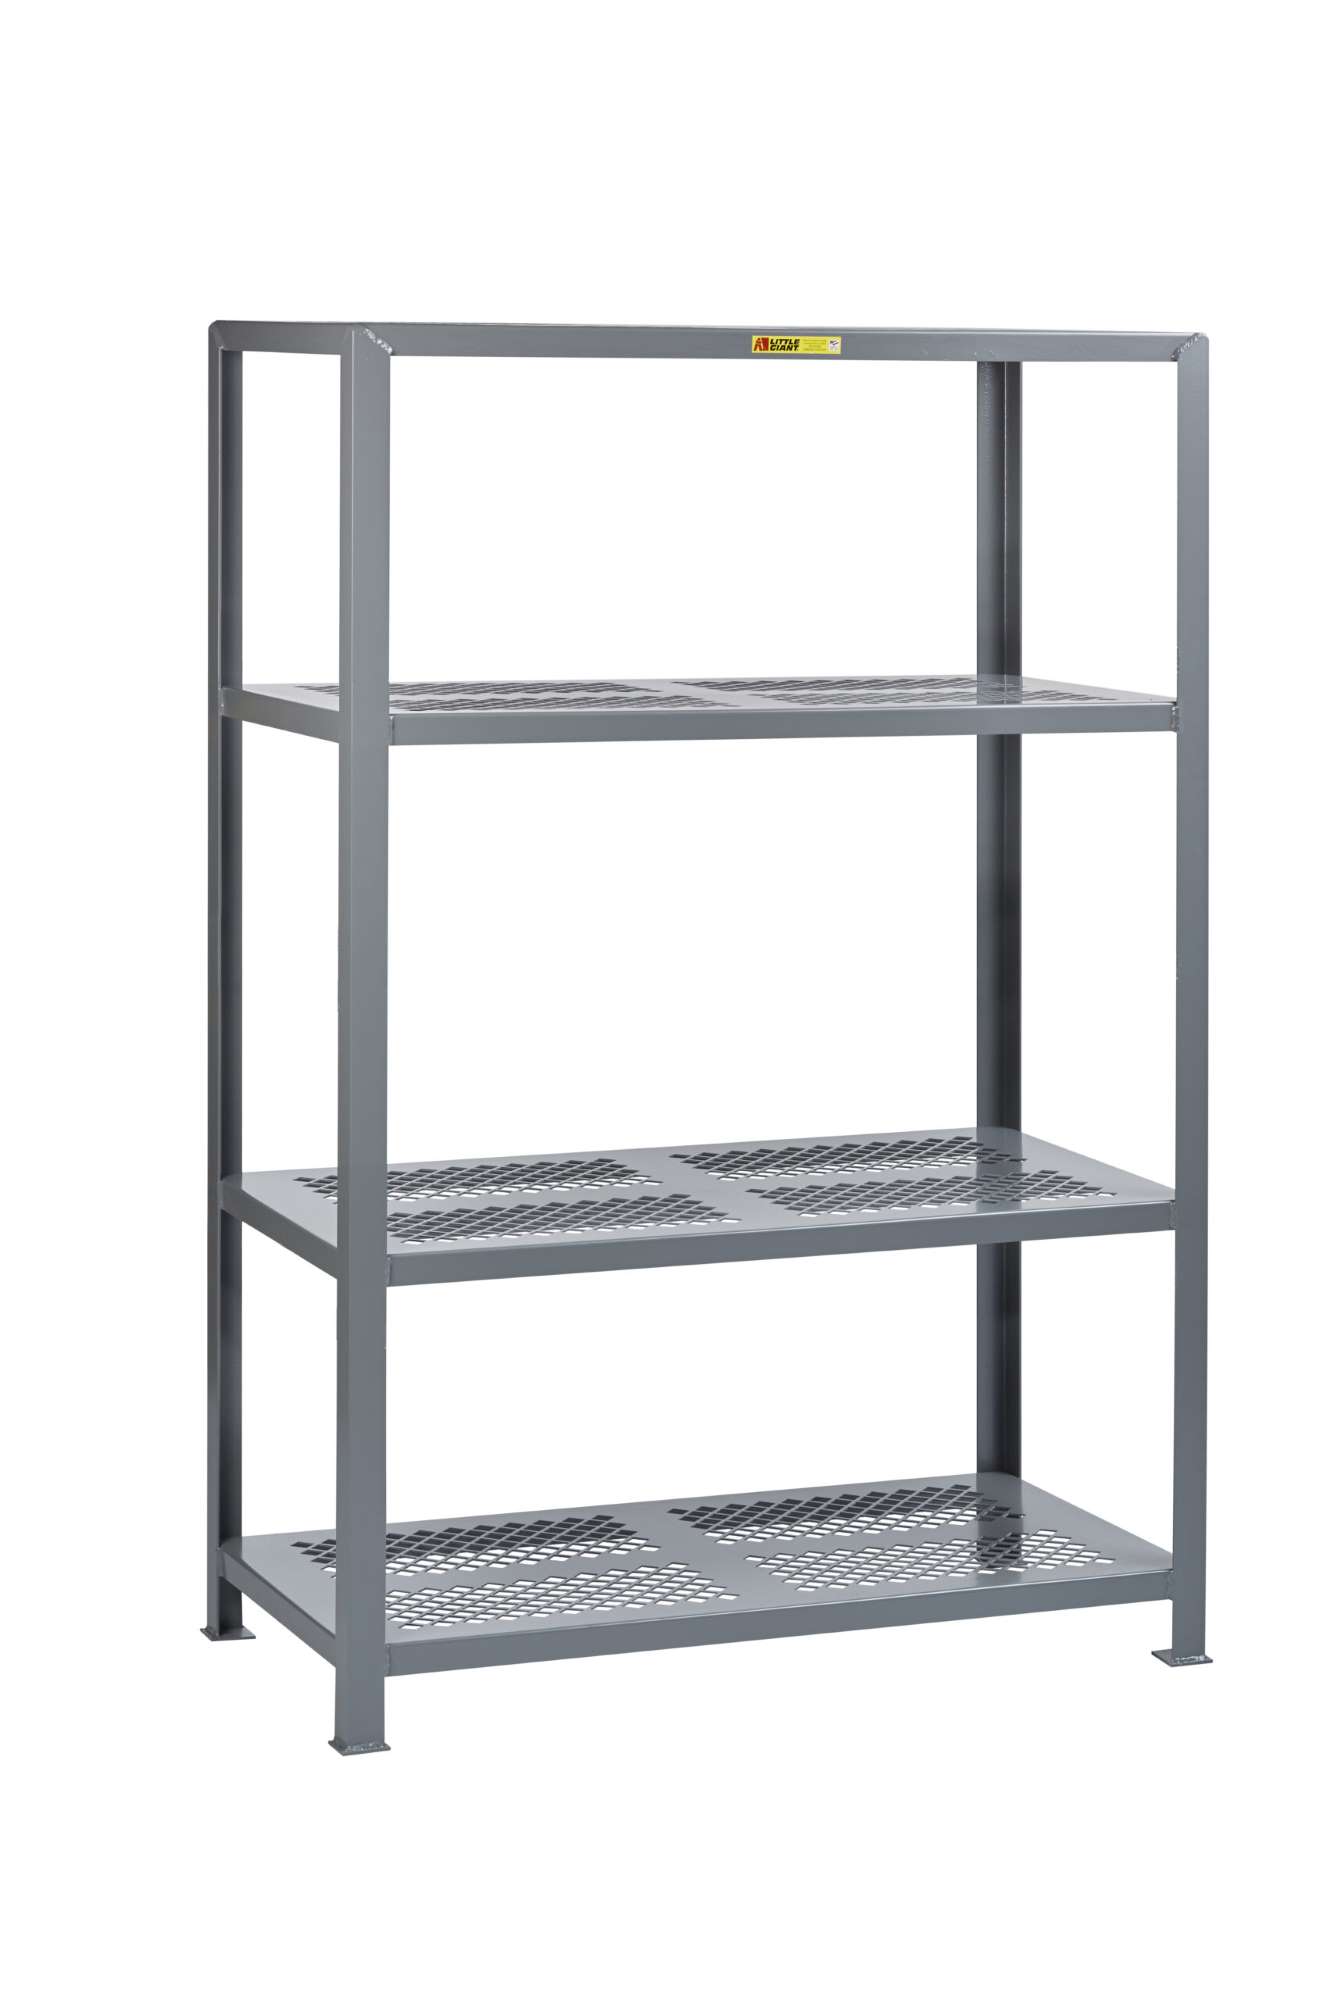 Little Giant Perforated Steel Shelving, 4 perforated shelves, All welded